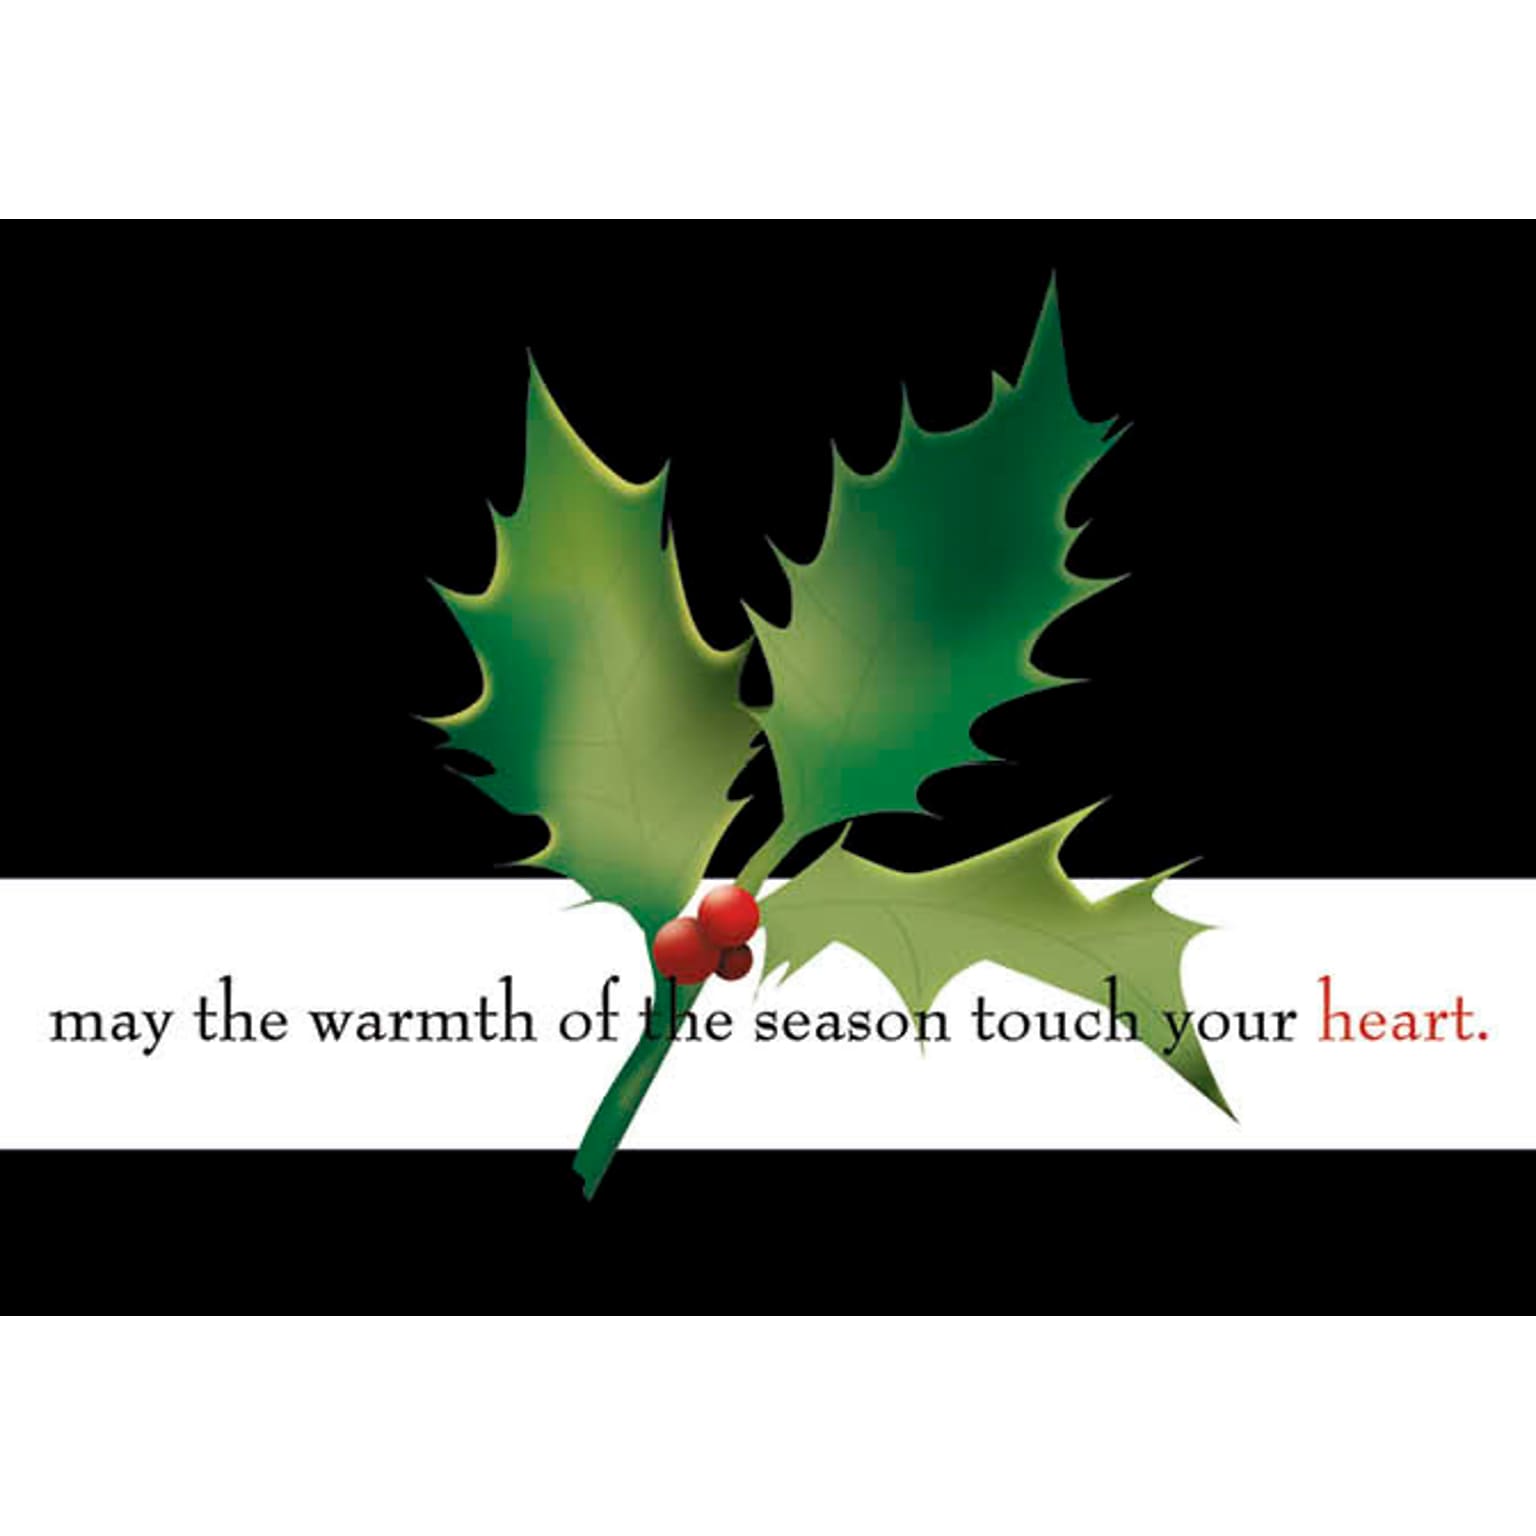 May The Warmth Of The Season Touch Your Heart Holiday Greeting Cards, With A7 Envelopes, 7 x 5, 25 Cards per Set